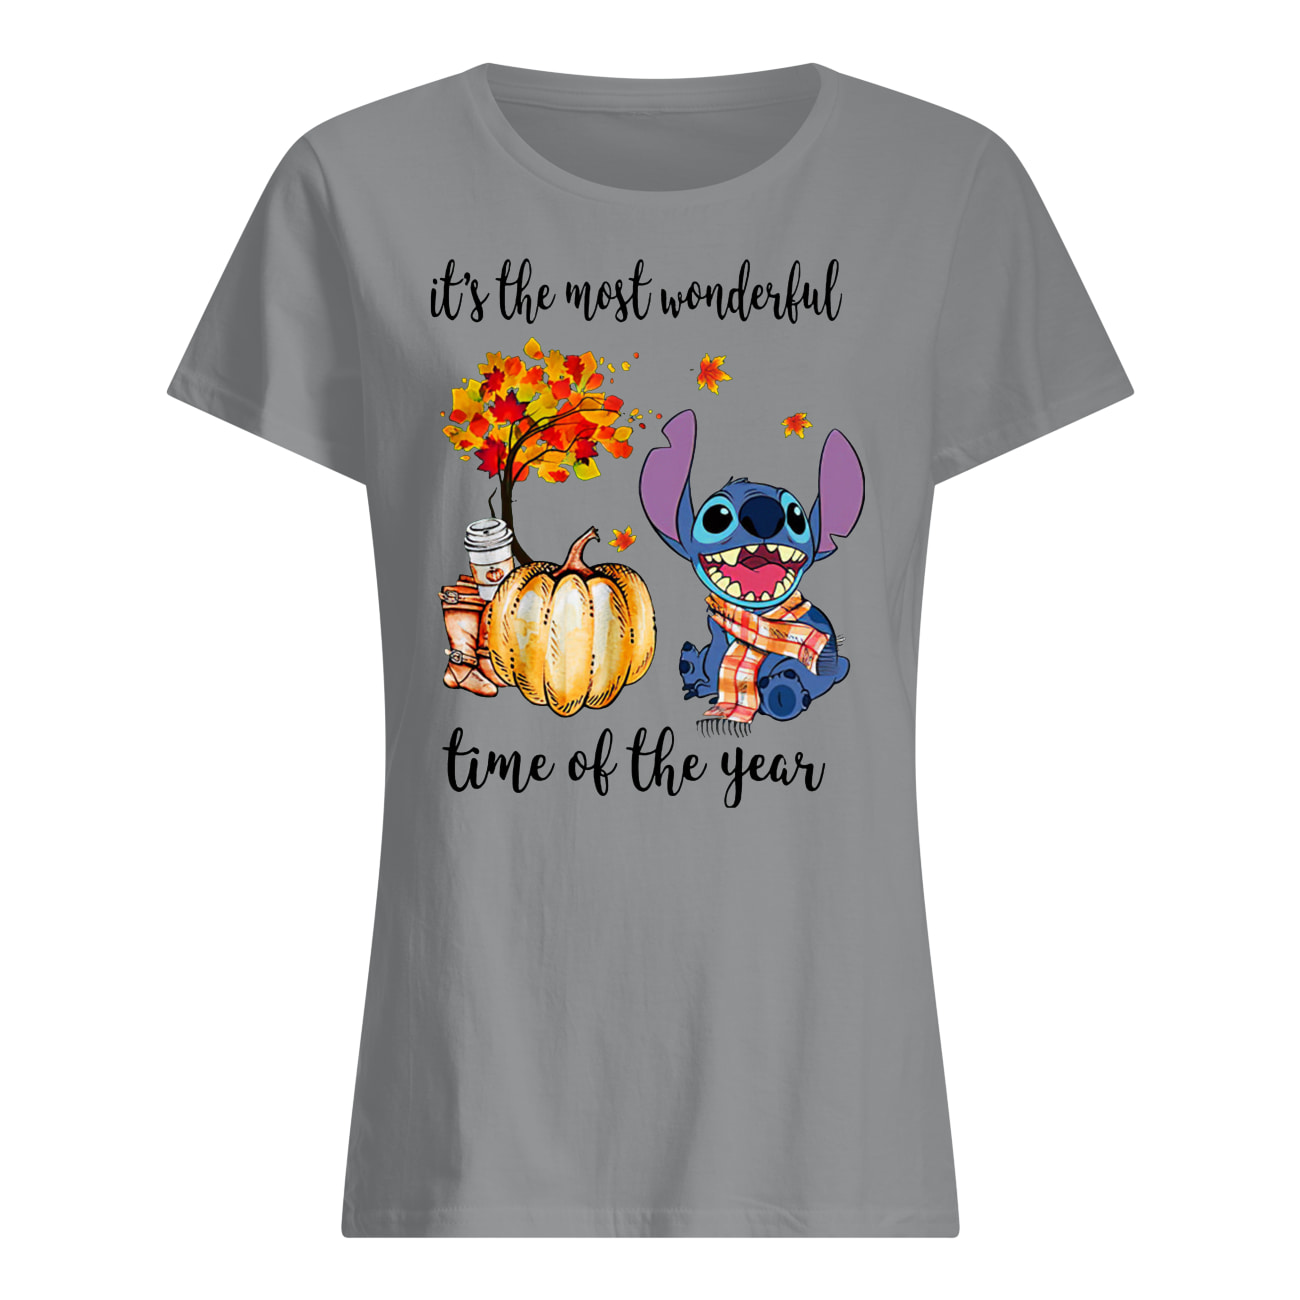 Stitch it’s the most wonderful time of the year women's shirt